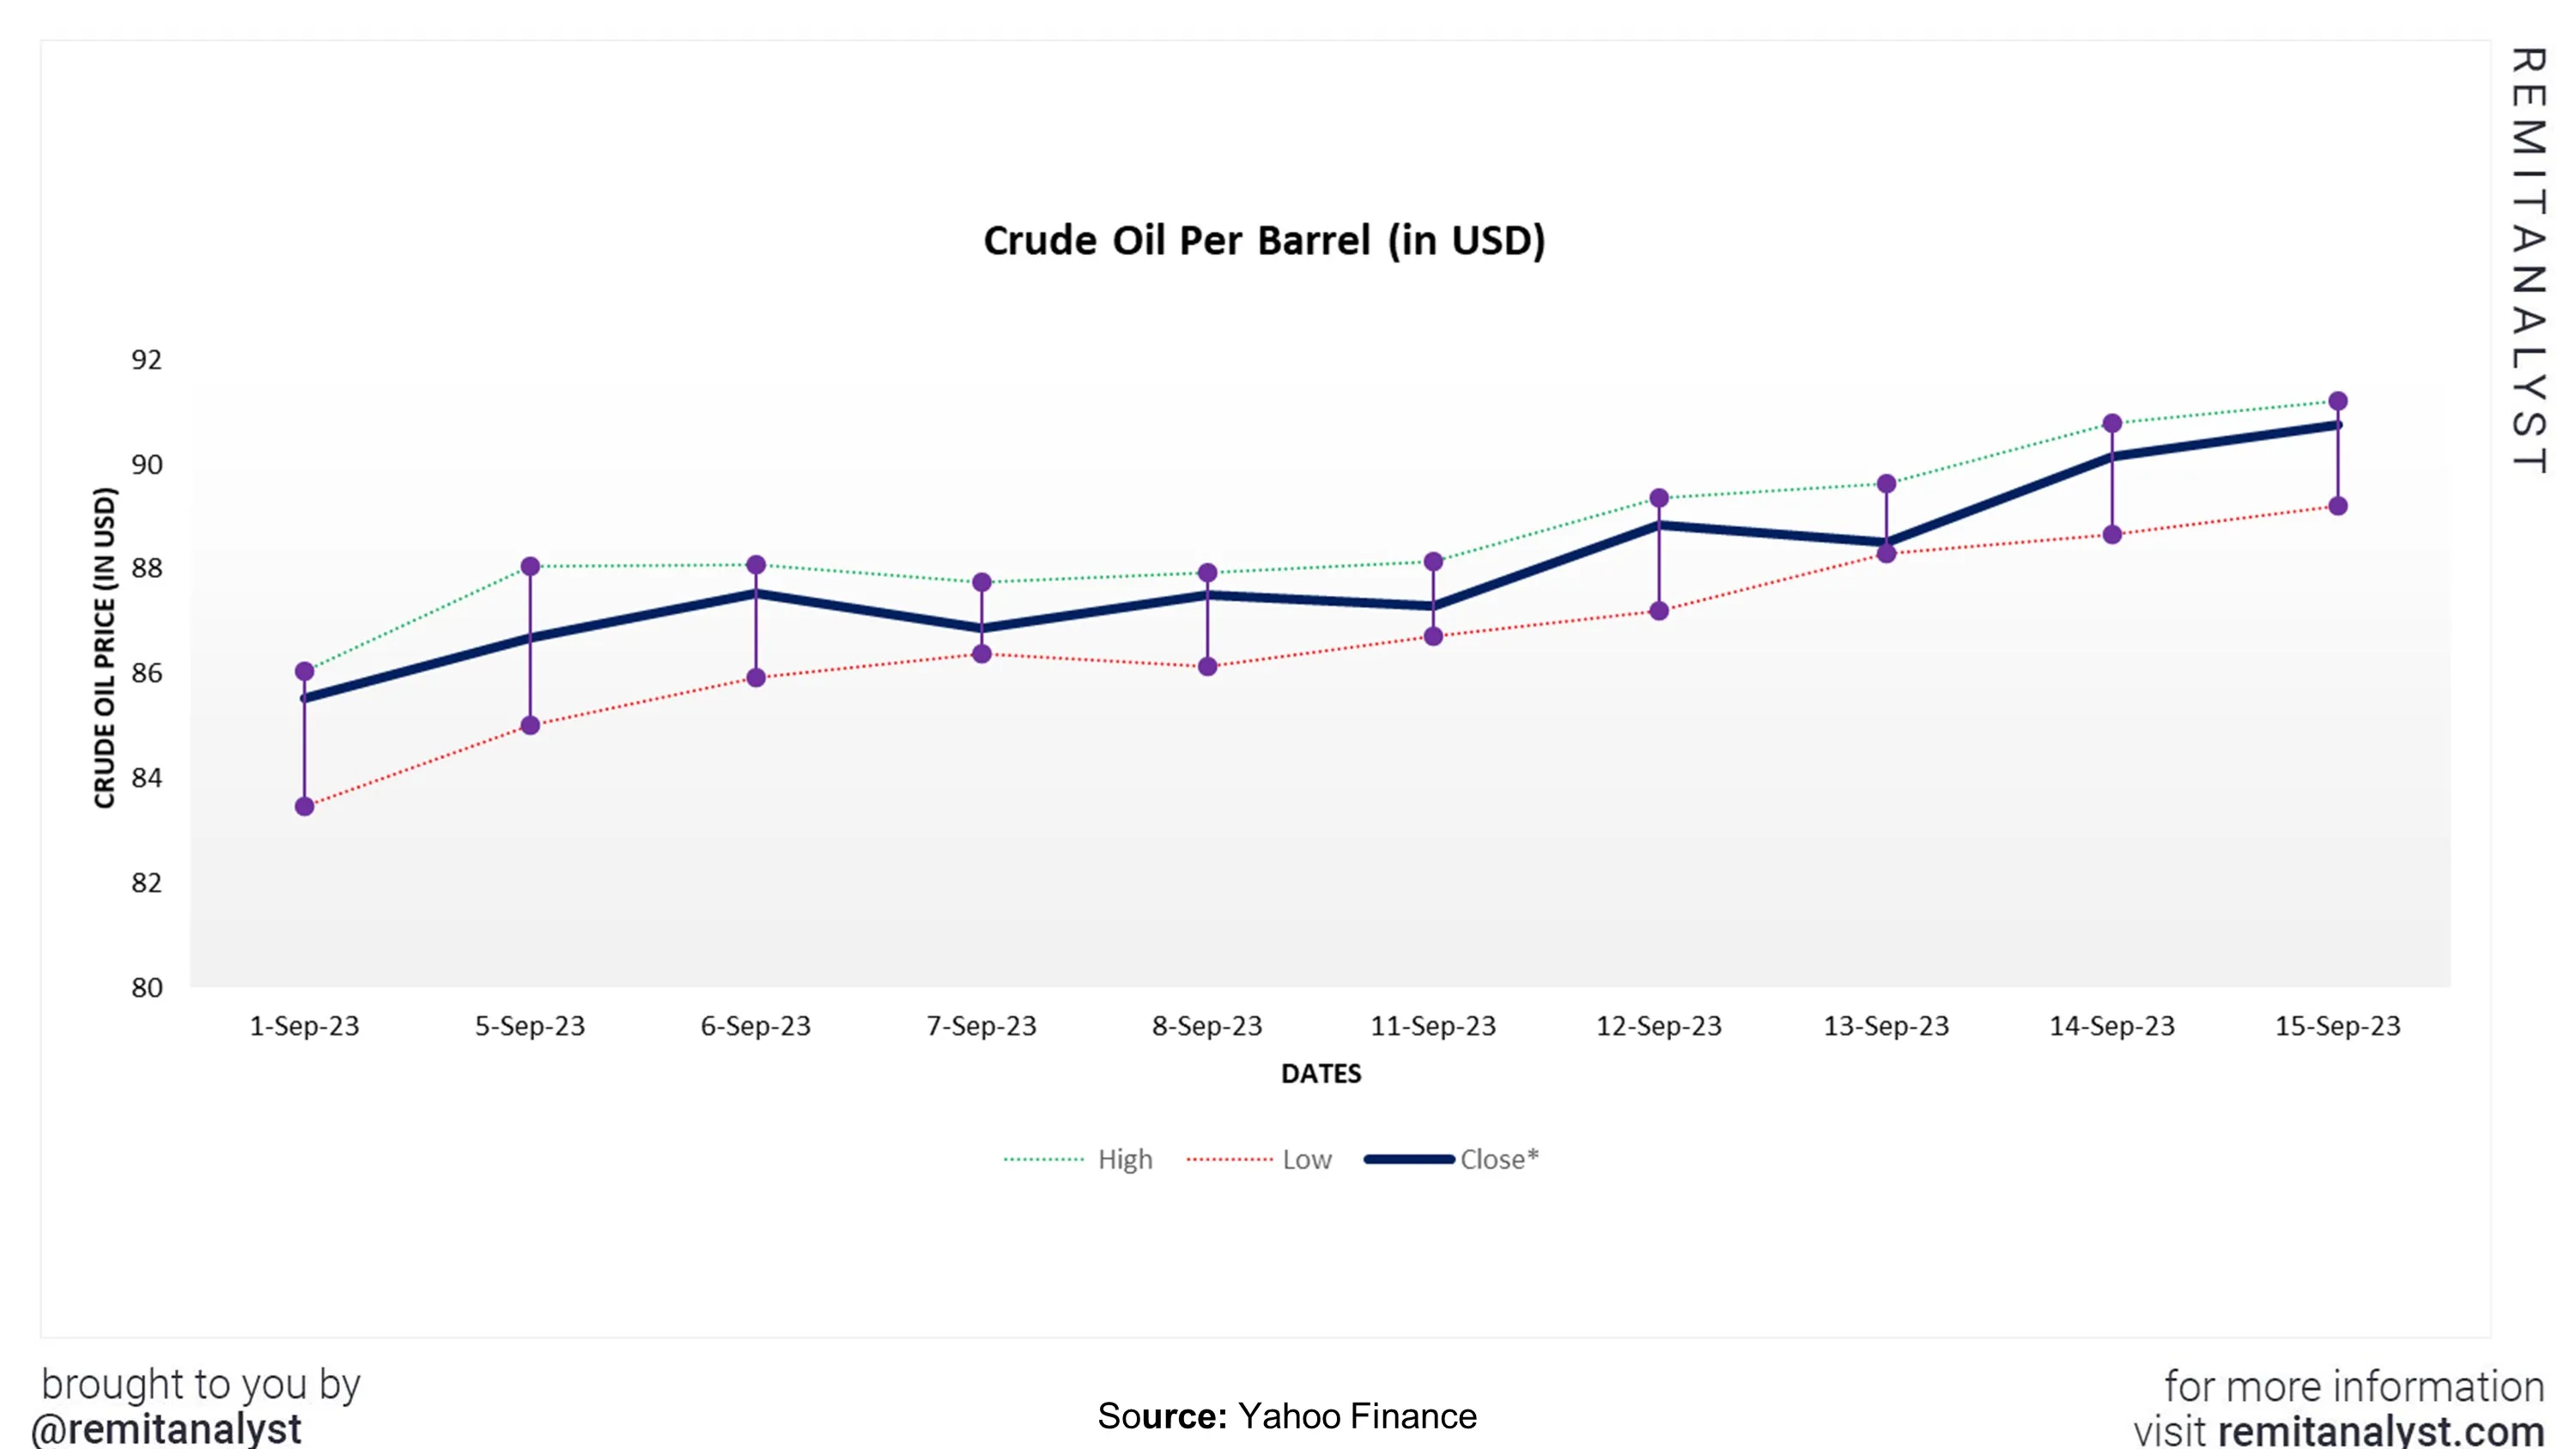 crude-oil-prices-from-1-sep-2023-to-15-sep-2023